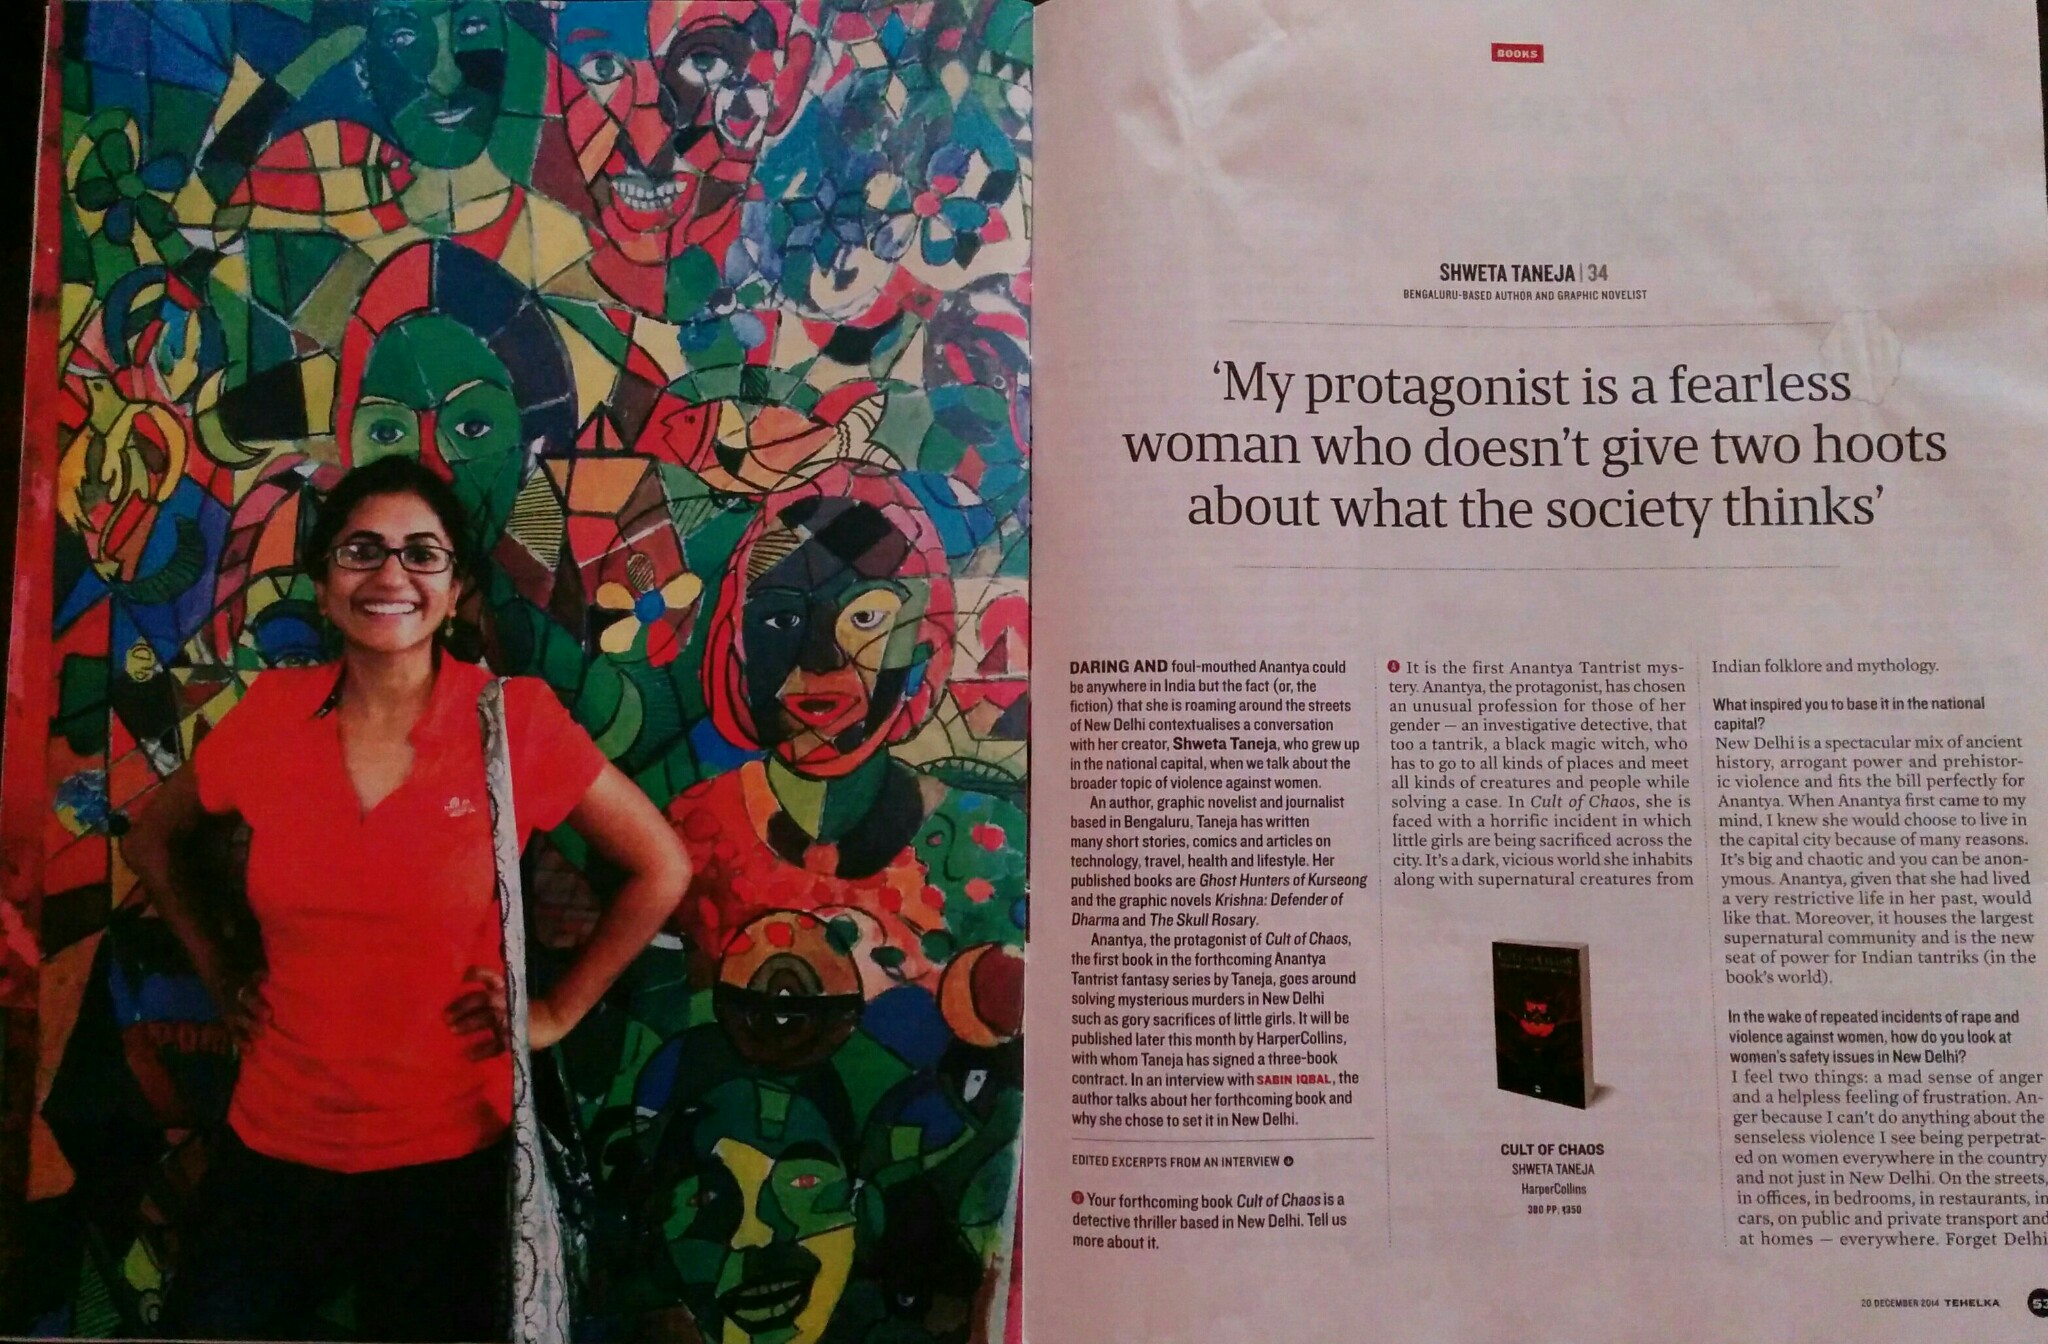 http://www.tehelka.com/my-protagonist-is-a-fearless-woman-who-doesnt-give-two-hoots-about-what-the-society-thinks/